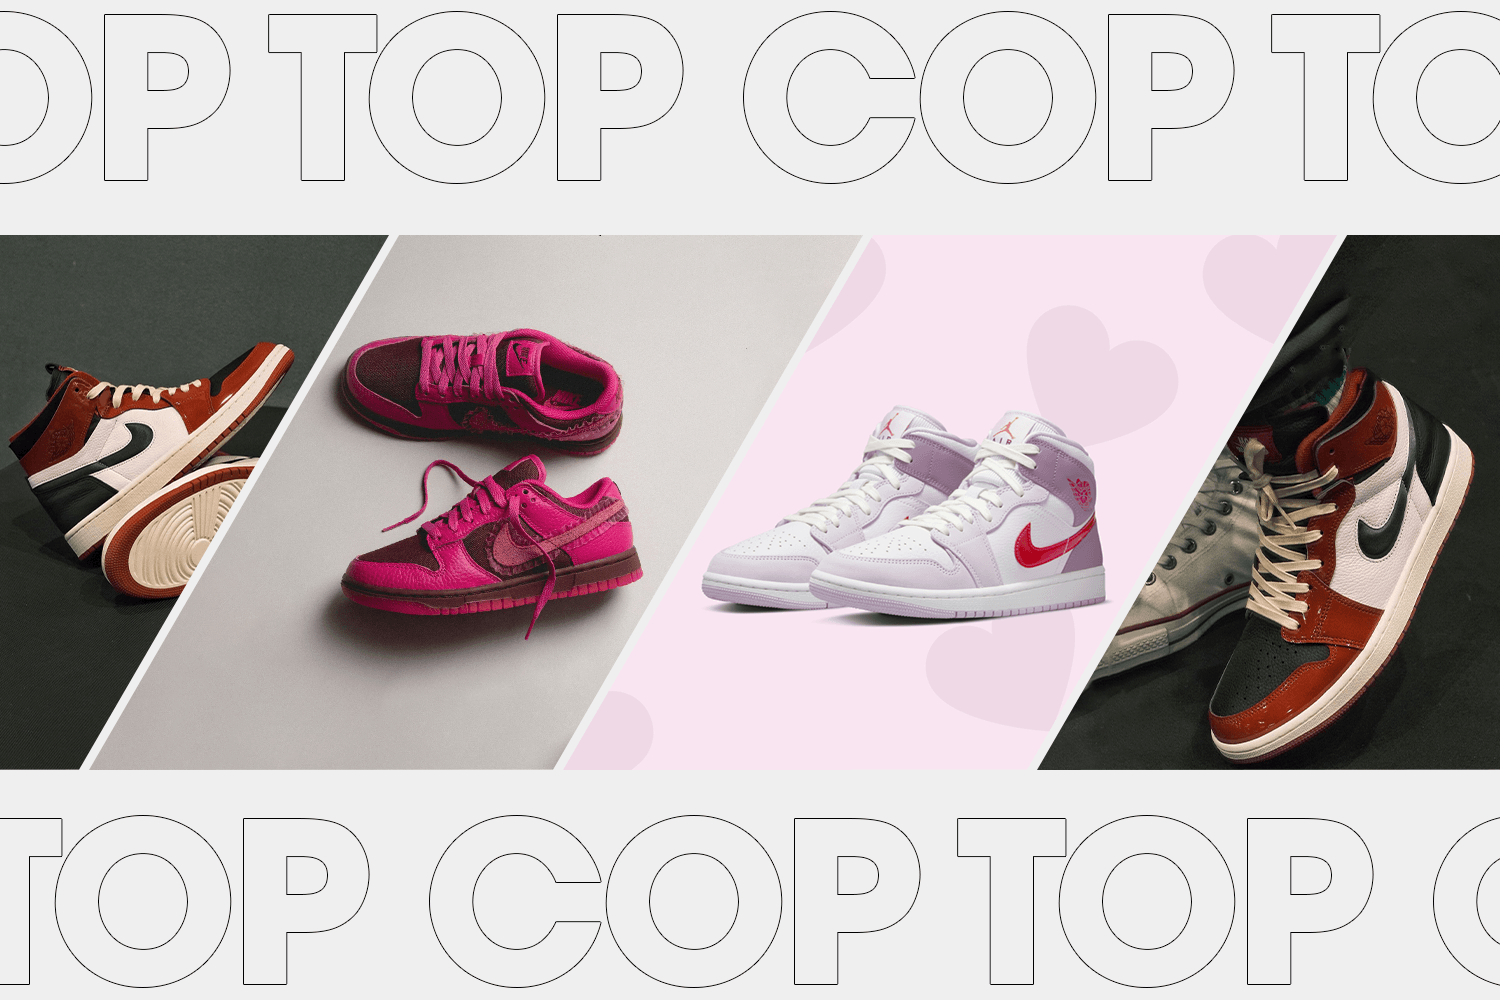 The community has voted: Your Top 3 Cop Sneaker Week 6